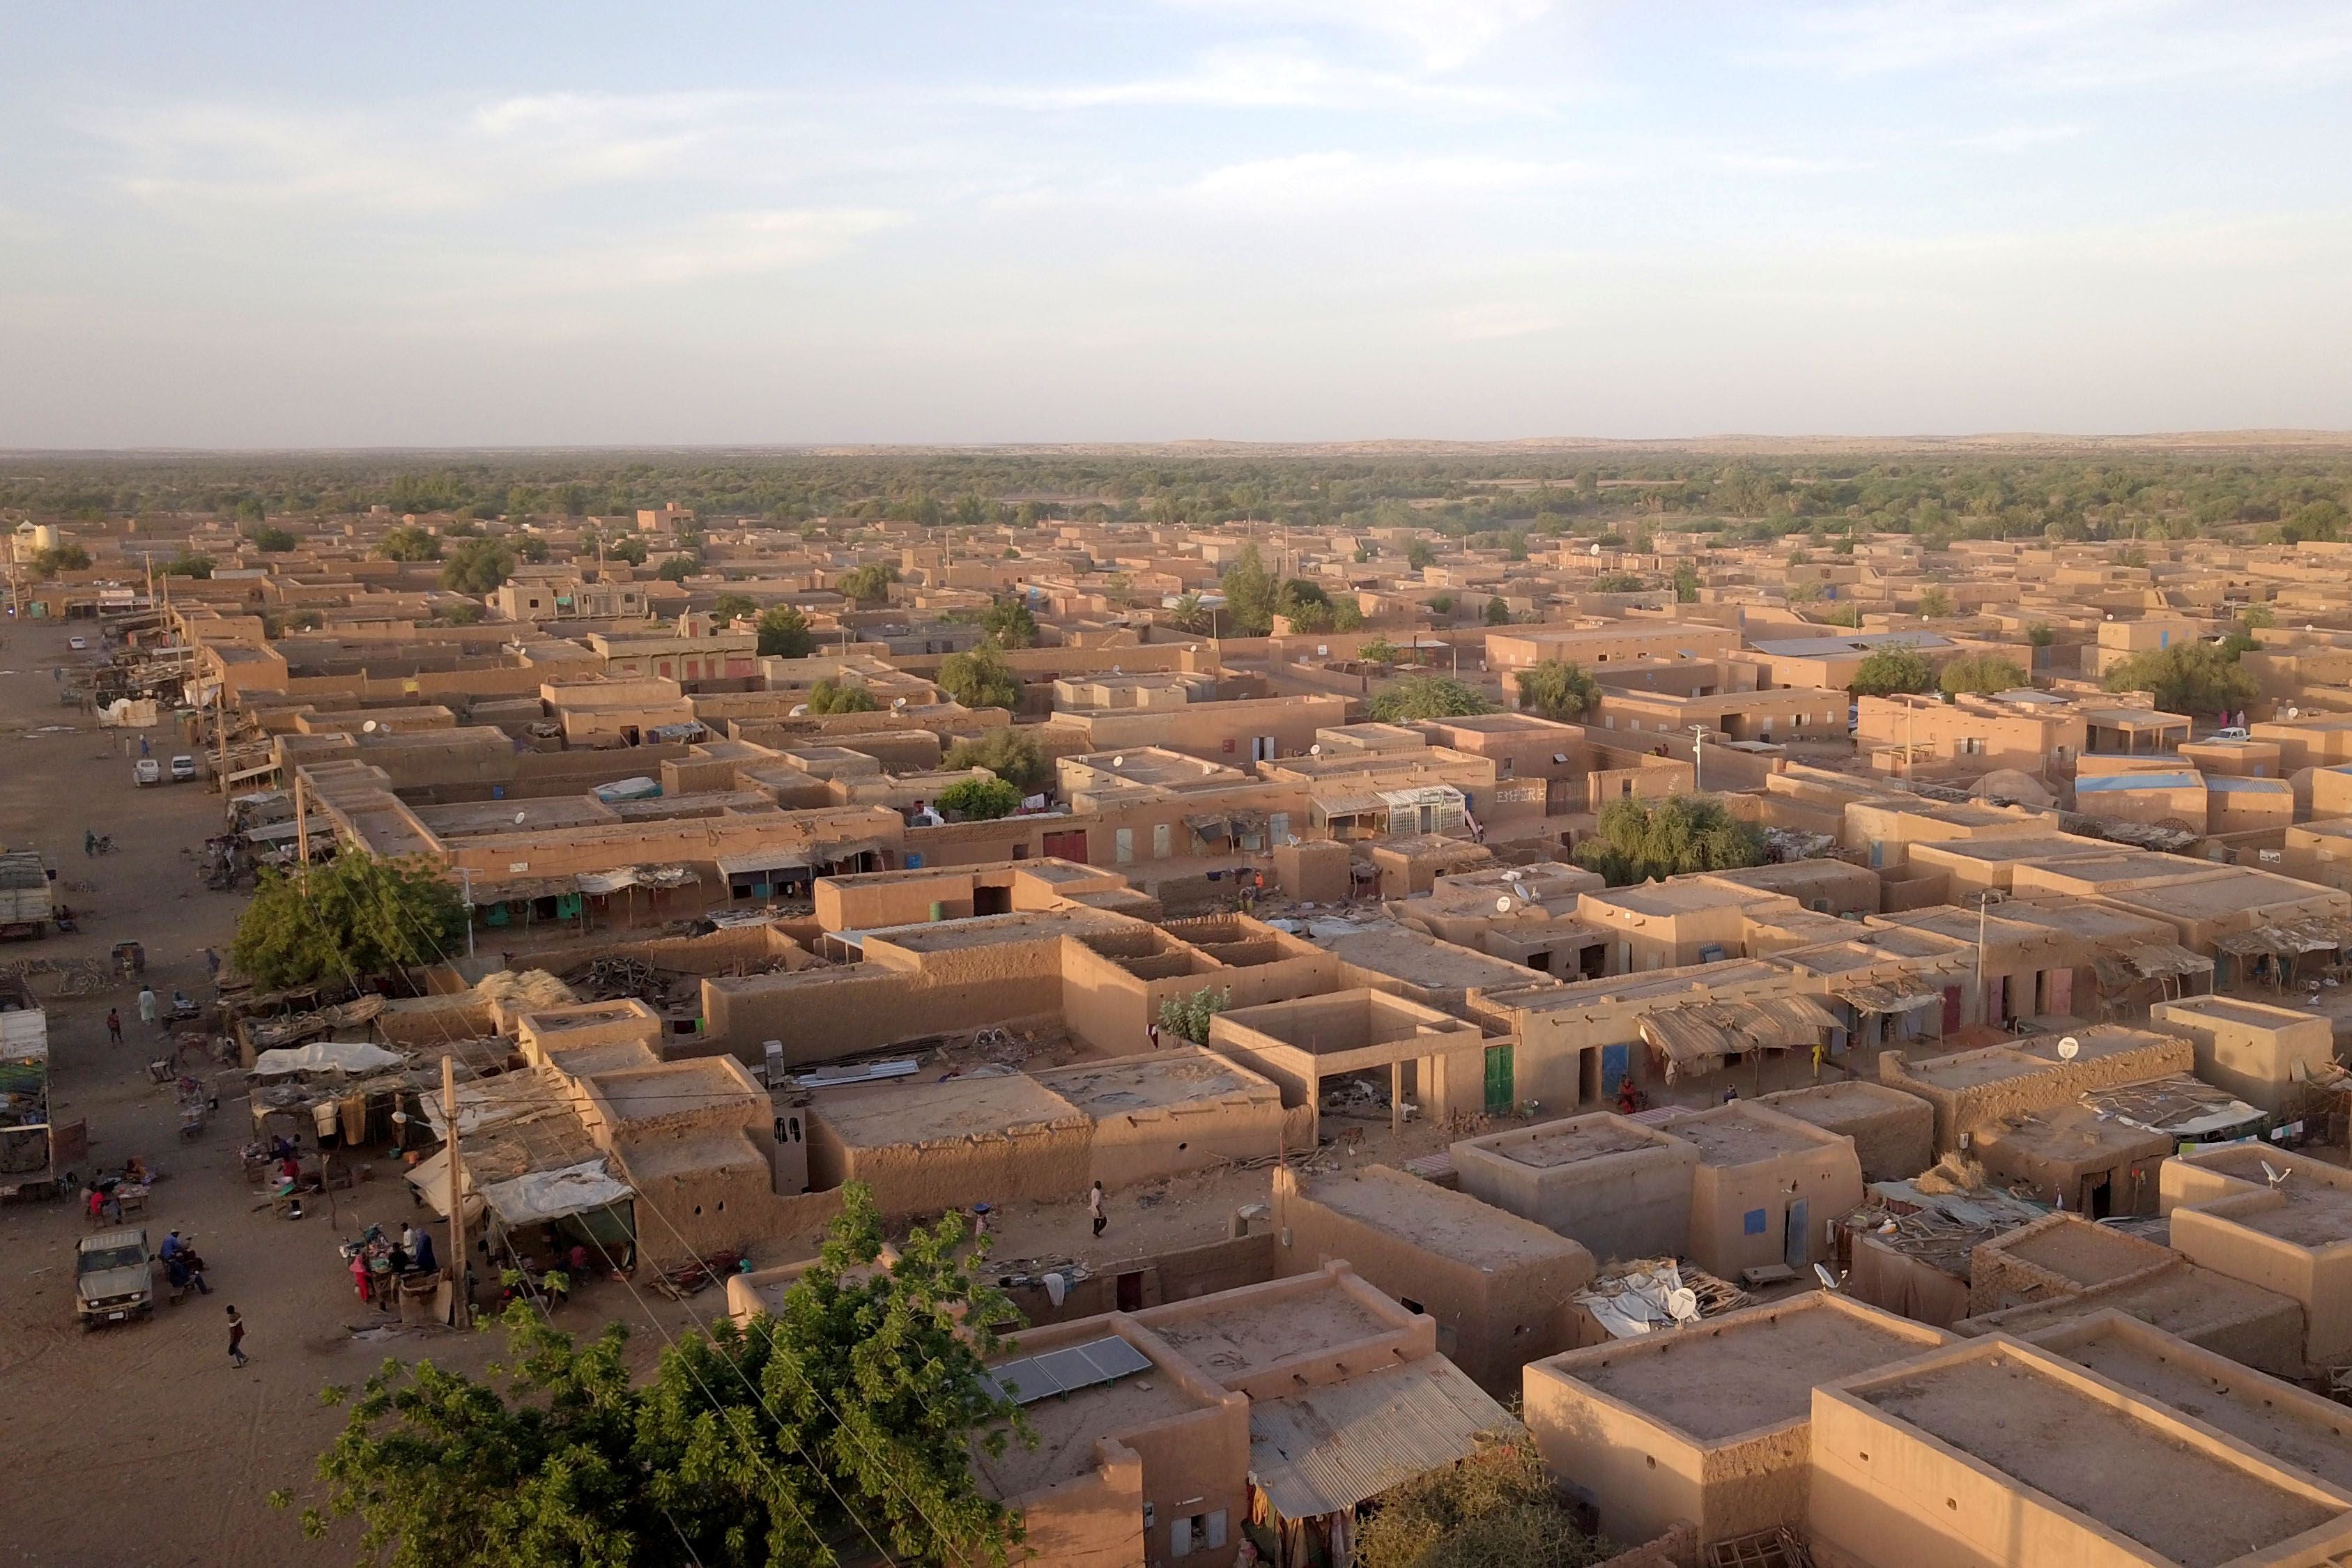 An aerial view of the town of Ménaka, Mali, on November 22, 2020. 